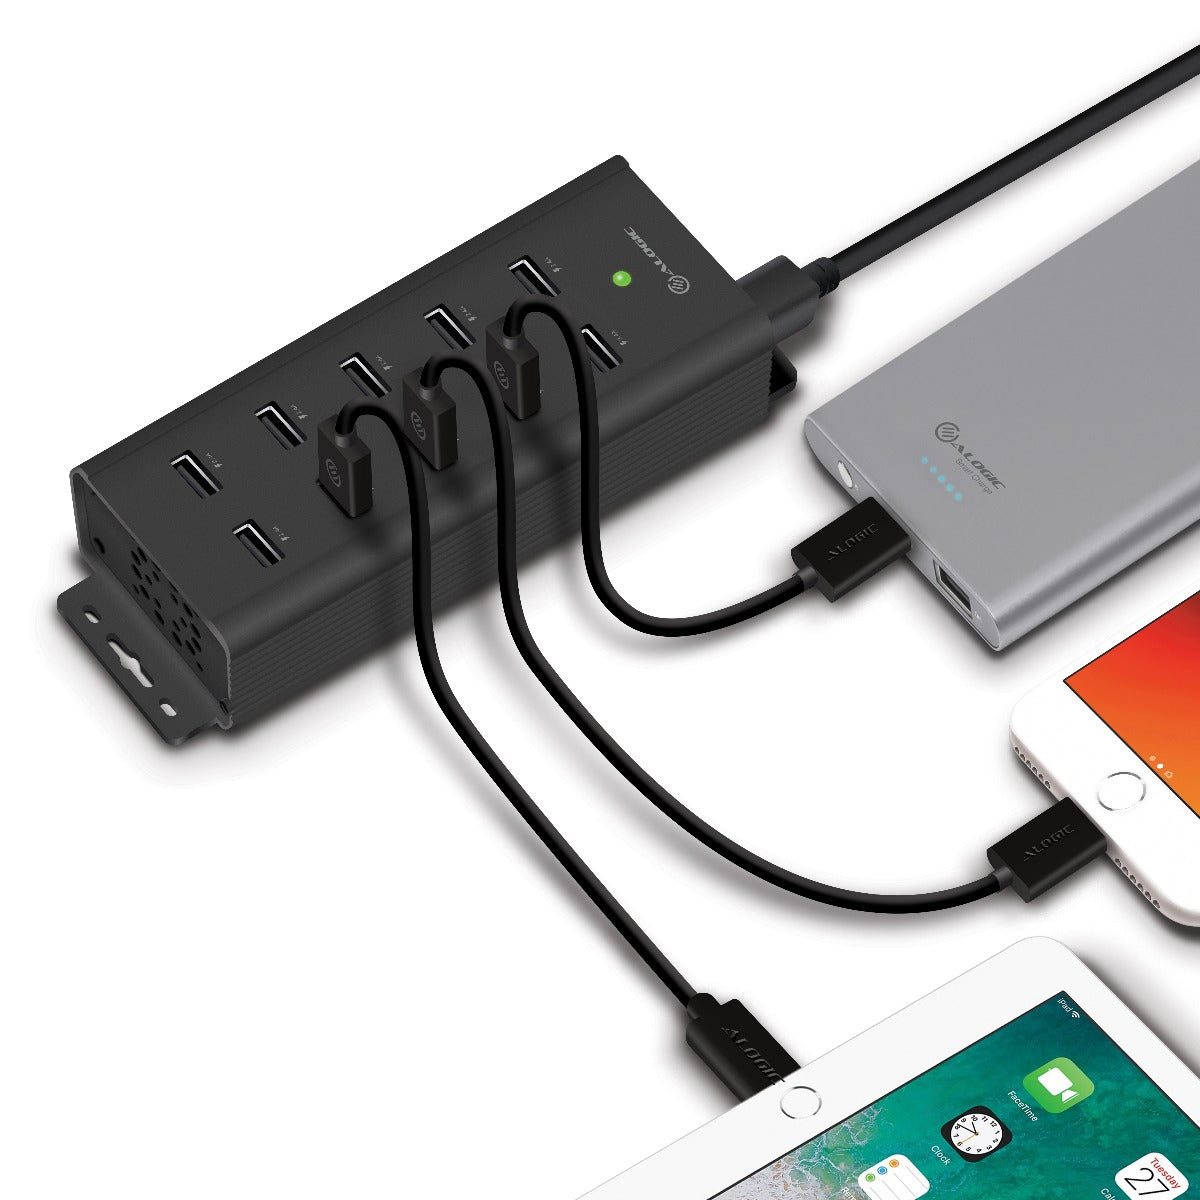 10 Port USB Charger with Smart Charge - Prime Series